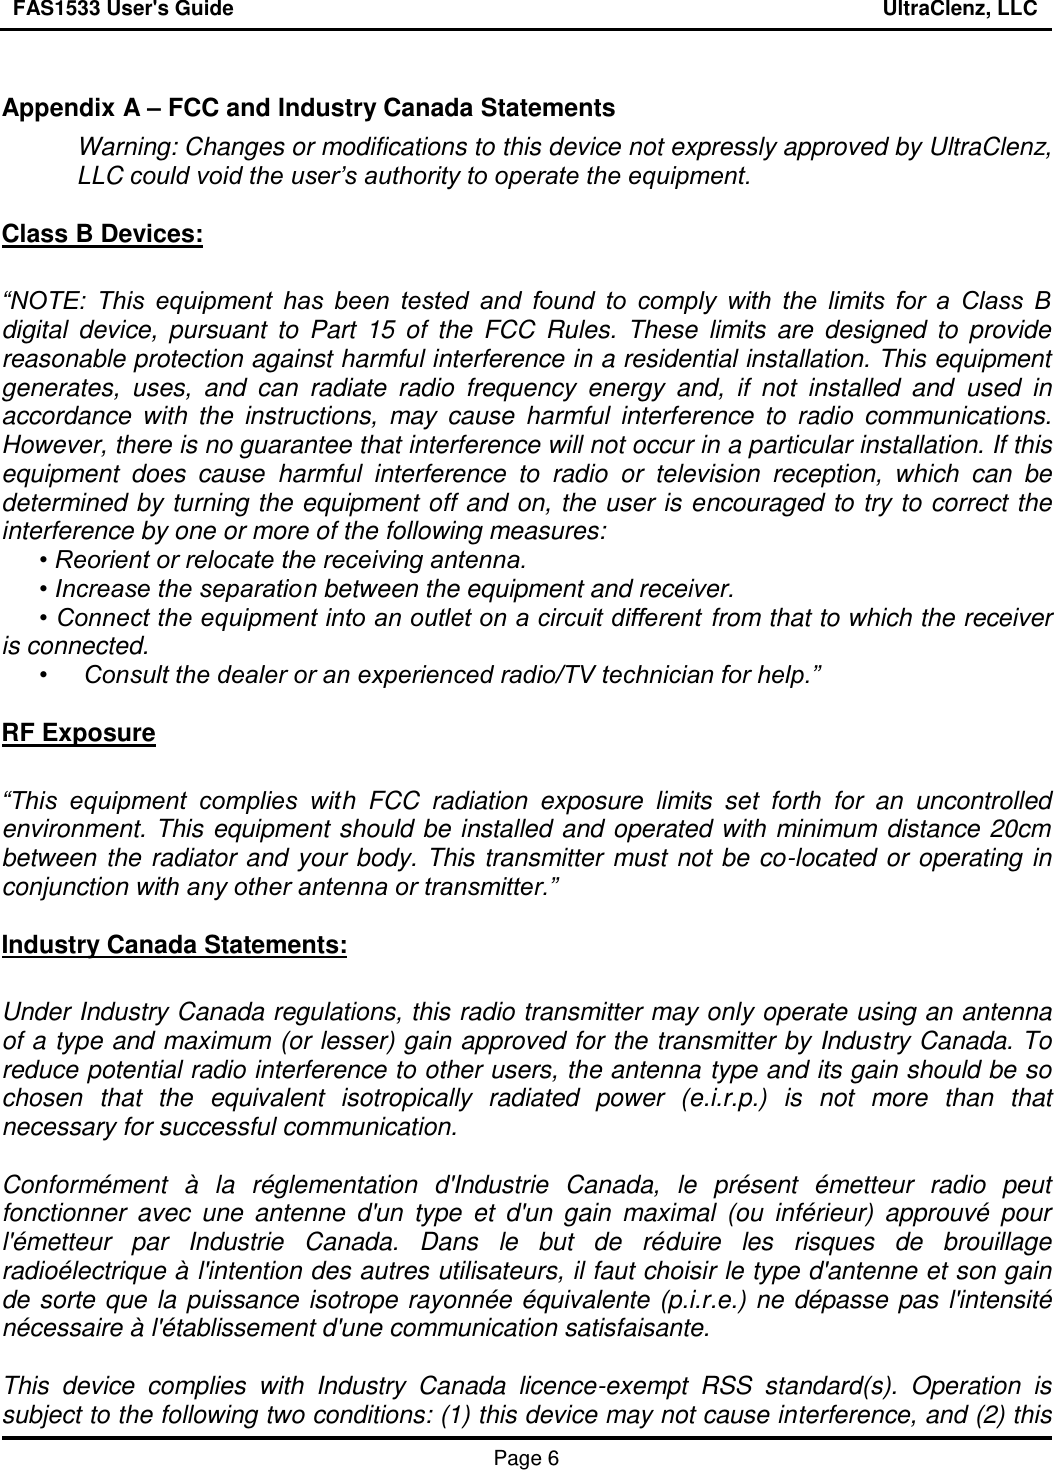 FAS1533 User&apos;s Guide                                                                                                                UltraClenz, LLC   Page 6   Appendix A – FCC and Industry Canada Statements Warning: Changes or modifications to this device not expressly approved by UltraClenz, LLC could void the user’s authority to operate the equipment.  Class B Devices:  “NOTE:  This  equipment  has  been  tested  and  found  to  comply  with  the  limits  for  a  Class  B digital  device,  pursuant  to  Part  15  of  the  FCC  Rules.  These  limits  are  designed  to  provide reasonable protection against harmful interference in a residential installation. This equipment generates,  uses,  and  can  radiate  radio  frequency  energy  and,  if  not  installed  and  used  in accordance  with the  instructions,  may  cause  harmful  interference  to  radio  communications. However, there is no guarantee that interference will not occur in a particular installation. If this equipment  does  cause  harmful  interference  to  radio  or  television  reception,  which  can  be determined by turning the equipment off and on, the user is encouraged to try to correct the interference by one or more of the following measures:   • Reorient or relocate the receiving antenna.  • Increase the separation between the equipment and receiver.  • Connect the equipment into an outlet on a circuit different from that to which the receiver is connected.  •  Consult the dealer or an experienced radio/TV technician for help.”    RF Exposure  “This  equipment  complies  with  FCC  radiation  exposure  limits  set  forth  for  an  uncontrolled environment. This equipment should be installed and operated with minimum distance 20cm between the radiator and your body. This transmitter must not be co-located or operating in conjunction with any other antenna or transmitter.”  Industry Canada Statements:  Under Industry Canada regulations, this radio transmitter may only operate using an antenna of a type and maximum (or lesser) gain approved for the transmitter by Industry Canada. To reduce potential radio interference to other users, the antenna type and its gain should be so chosen  that  the  equivalent  isotropically  radiated  power  (e.i.r.p.)  is  not  more  than  that necessary for successful communication.  Conformément  à  la  réglementation  d&apos;Industrie  Canada,  le  présent  émetteur  radio  peut fonctionner  avec  une  antenne  d&apos;un  type  et  d&apos;un  gain  maximal  (ou  inférieur)  approuvé  pour l&apos;émetteur  par  Industrie  Canada.  Dans  le  but  de  réduire  les  risques  de  brouillage radioélectrique à l&apos;intention des autres utilisateurs, il faut choisir le type d&apos;antenne et son gain de sorte que la puissance isotrope rayonnée équivalente (p.i.r.e.) ne dépasse pas l&apos;intensité nécessaire à l&apos;établissement d&apos;une communication satisfaisante.  This  device  complies  with  Industry  Canada  licence-exempt  RSS  standard(s).  Operation  is subject to the following two conditions: (1) this device may not cause interference, and (2) this 